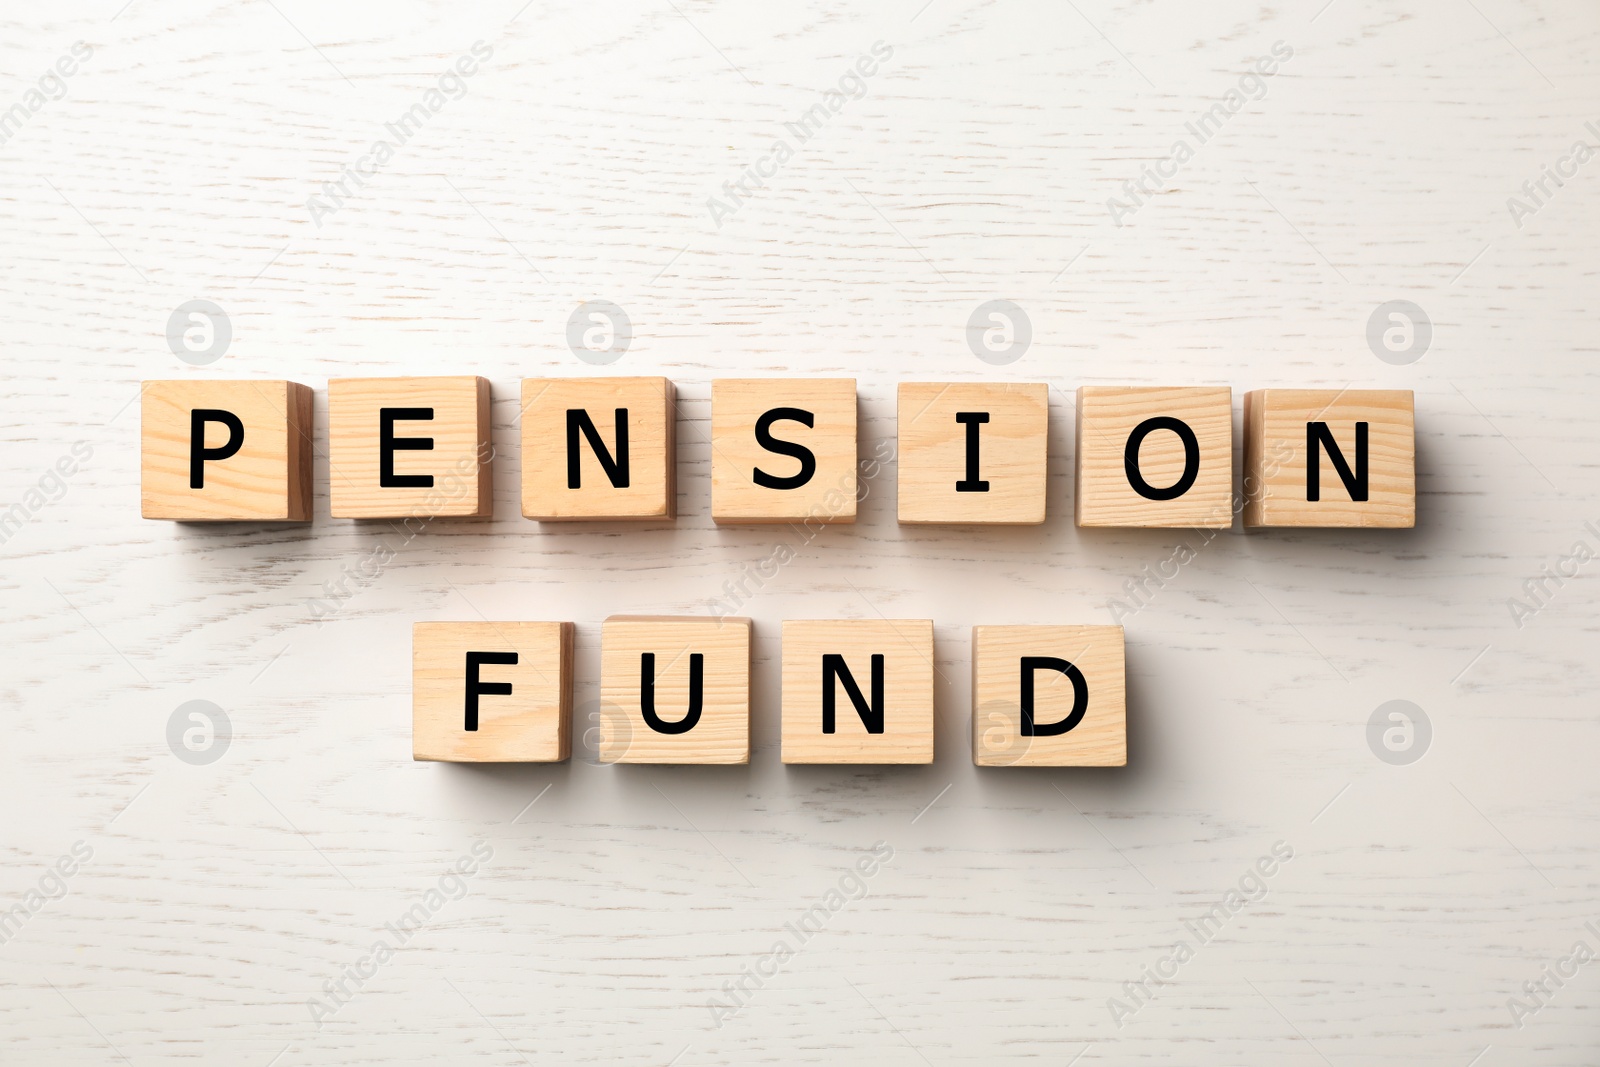 Photo of Cubes with words "PENSION FUND" on wooden background